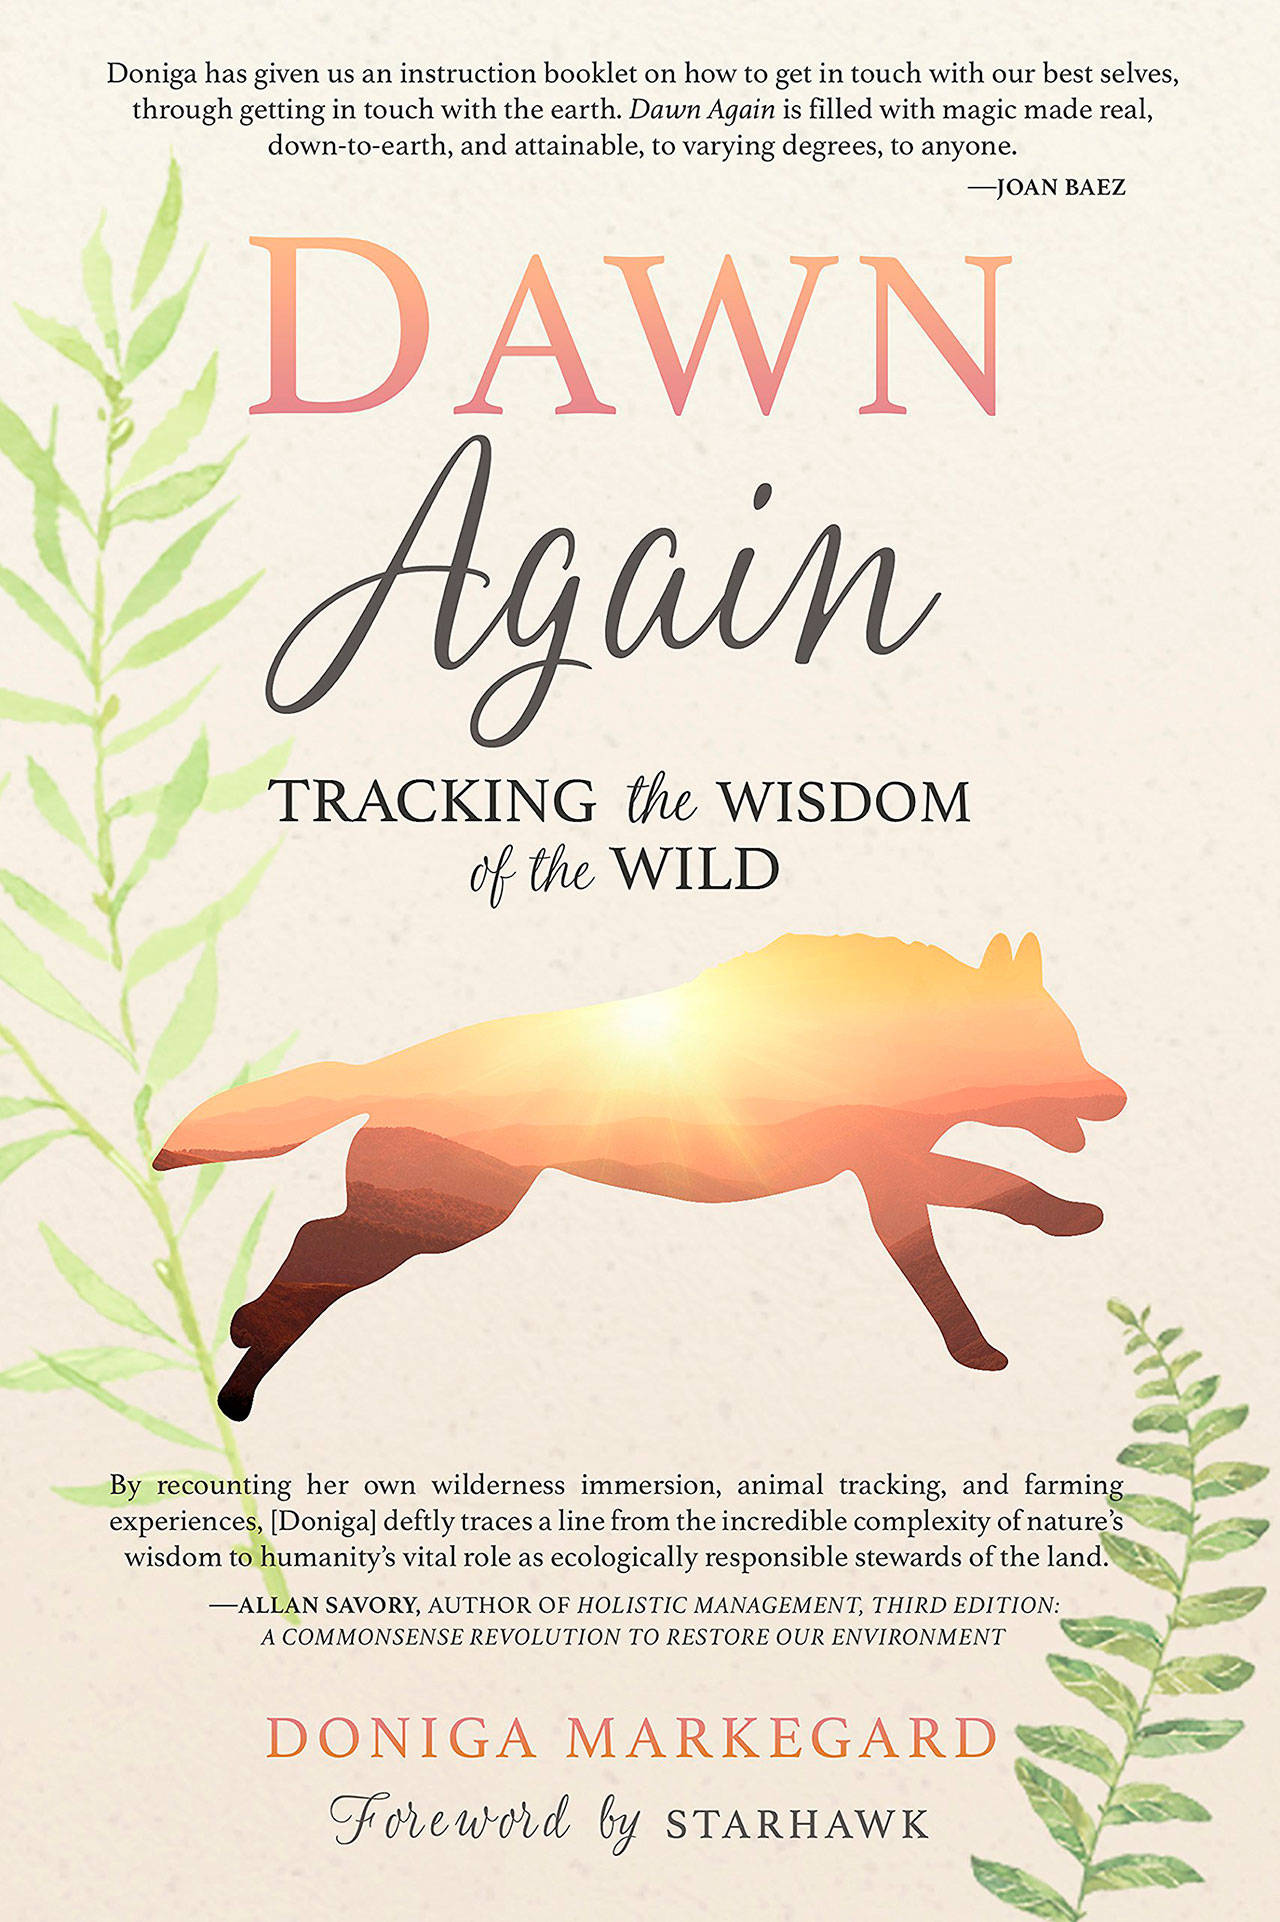 Image courtesy of Eagle Harbor Book Company | California author Doniga Markegard will visit Eagle Harbor Book Company at 3 p.m. Sunday, Nov. 19 to discuss her new book “Dawn Again: Tracking the Wisdom of the Wild.”